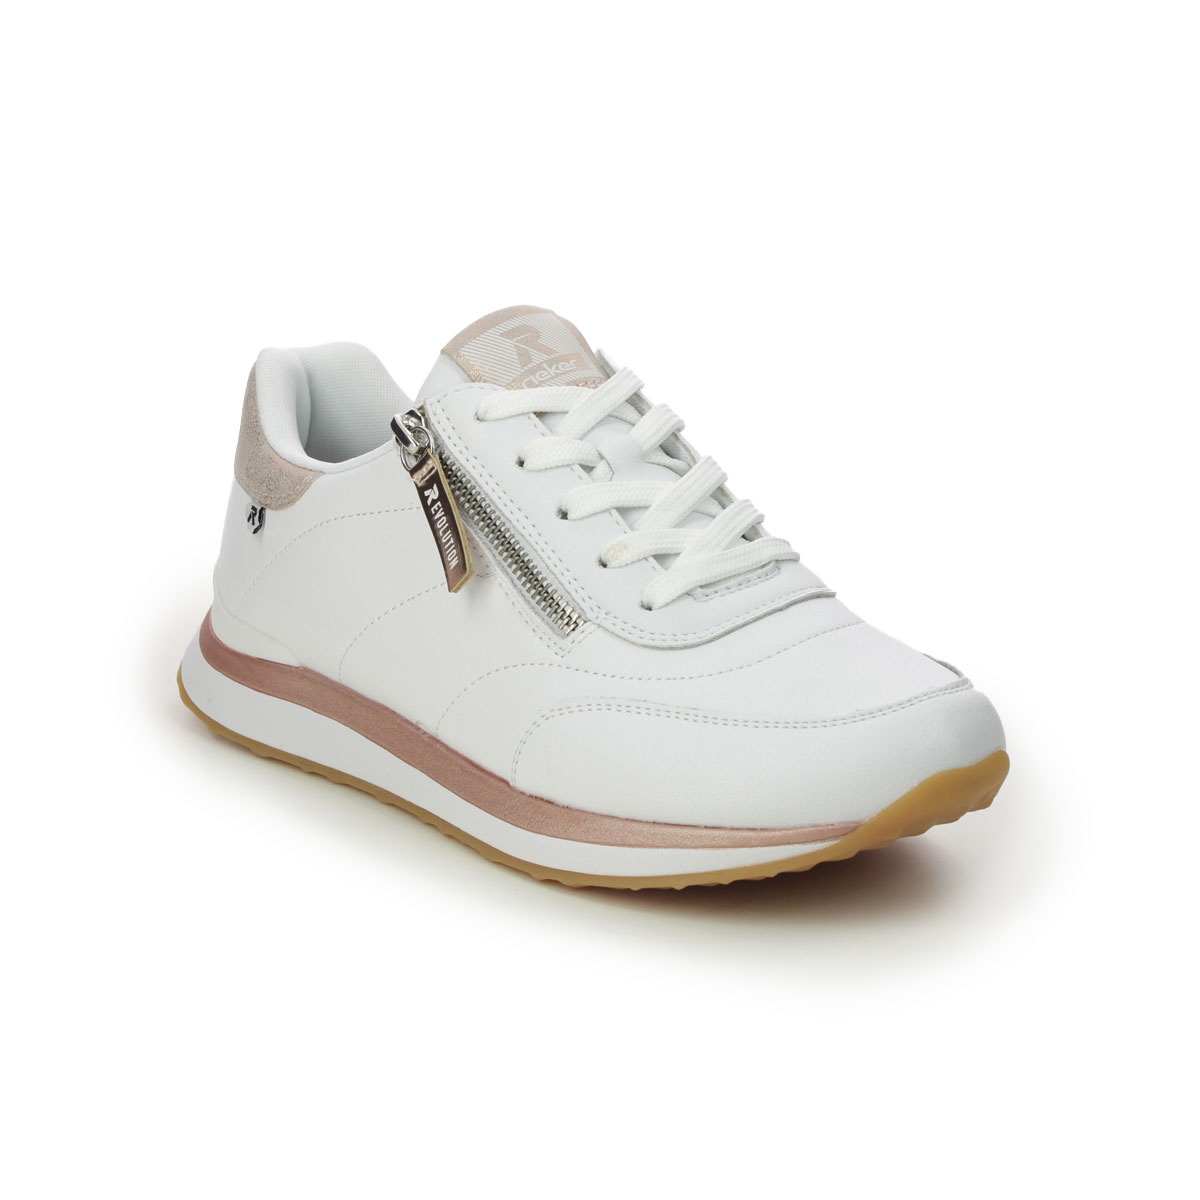 Rieker 42505-80 White Rose Gold Womens trainers in a Plain Leather in Size 40